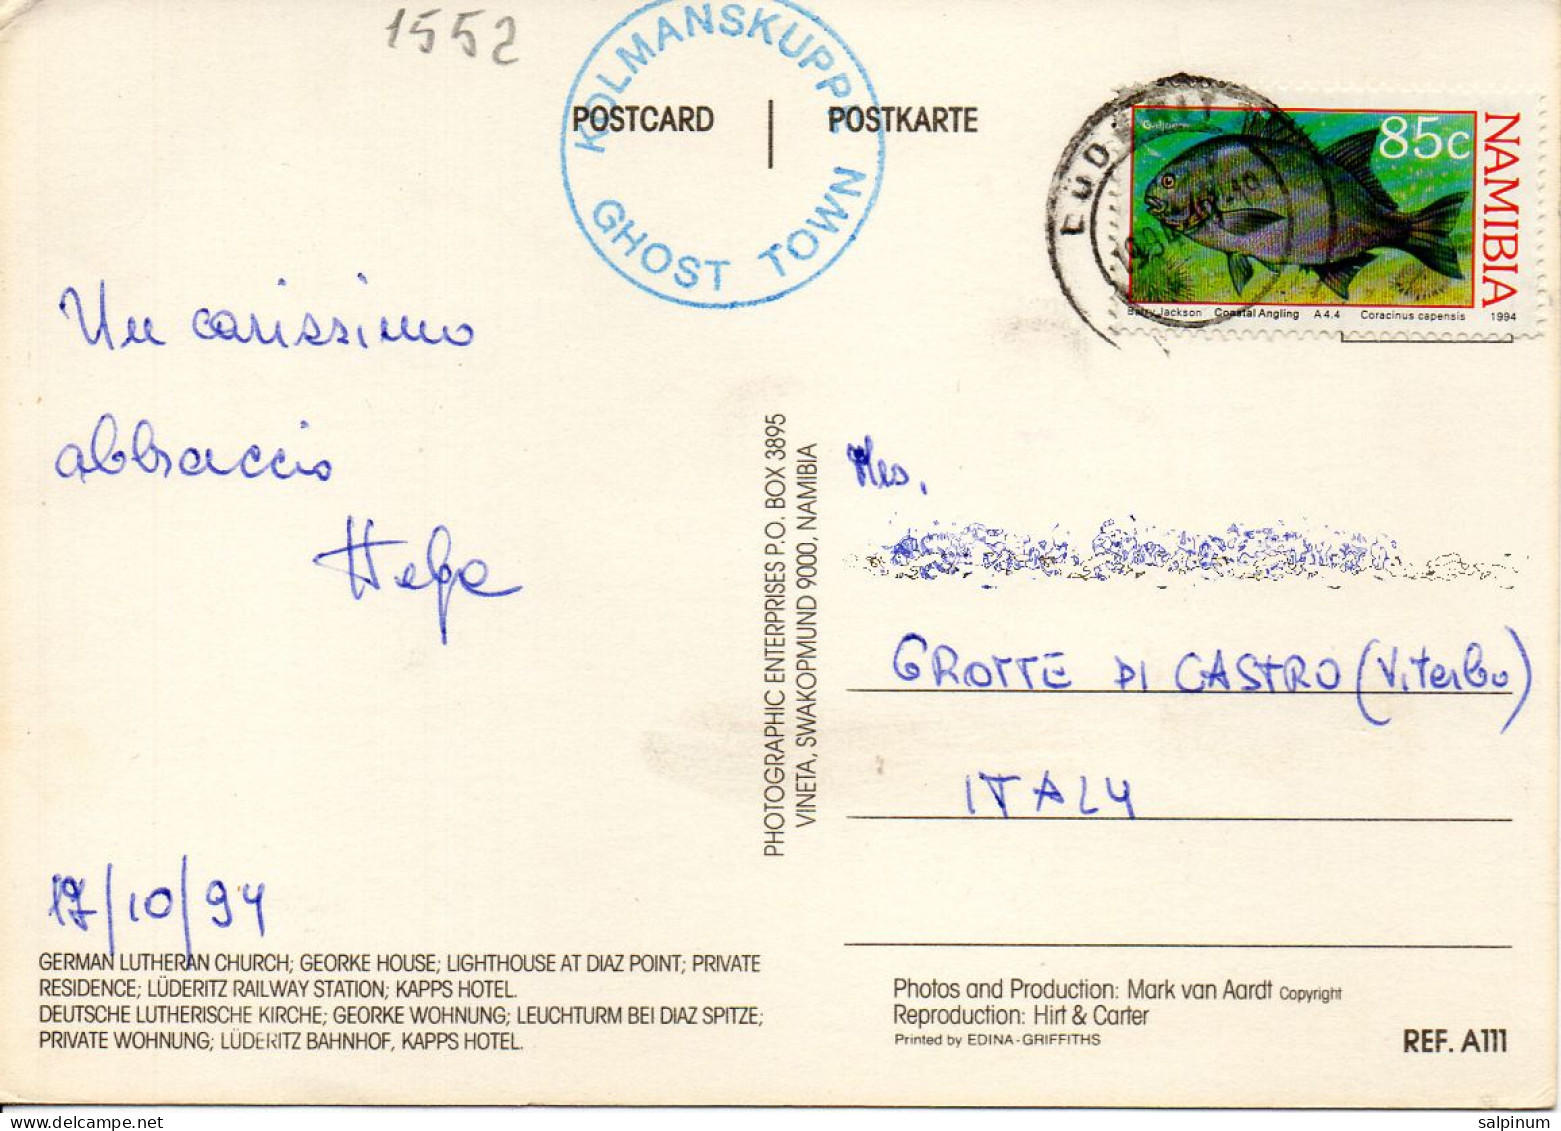 Philatelic Postcard With Stamps Sent From NAMIBIA To ITALY - Namibie (1990- ...)